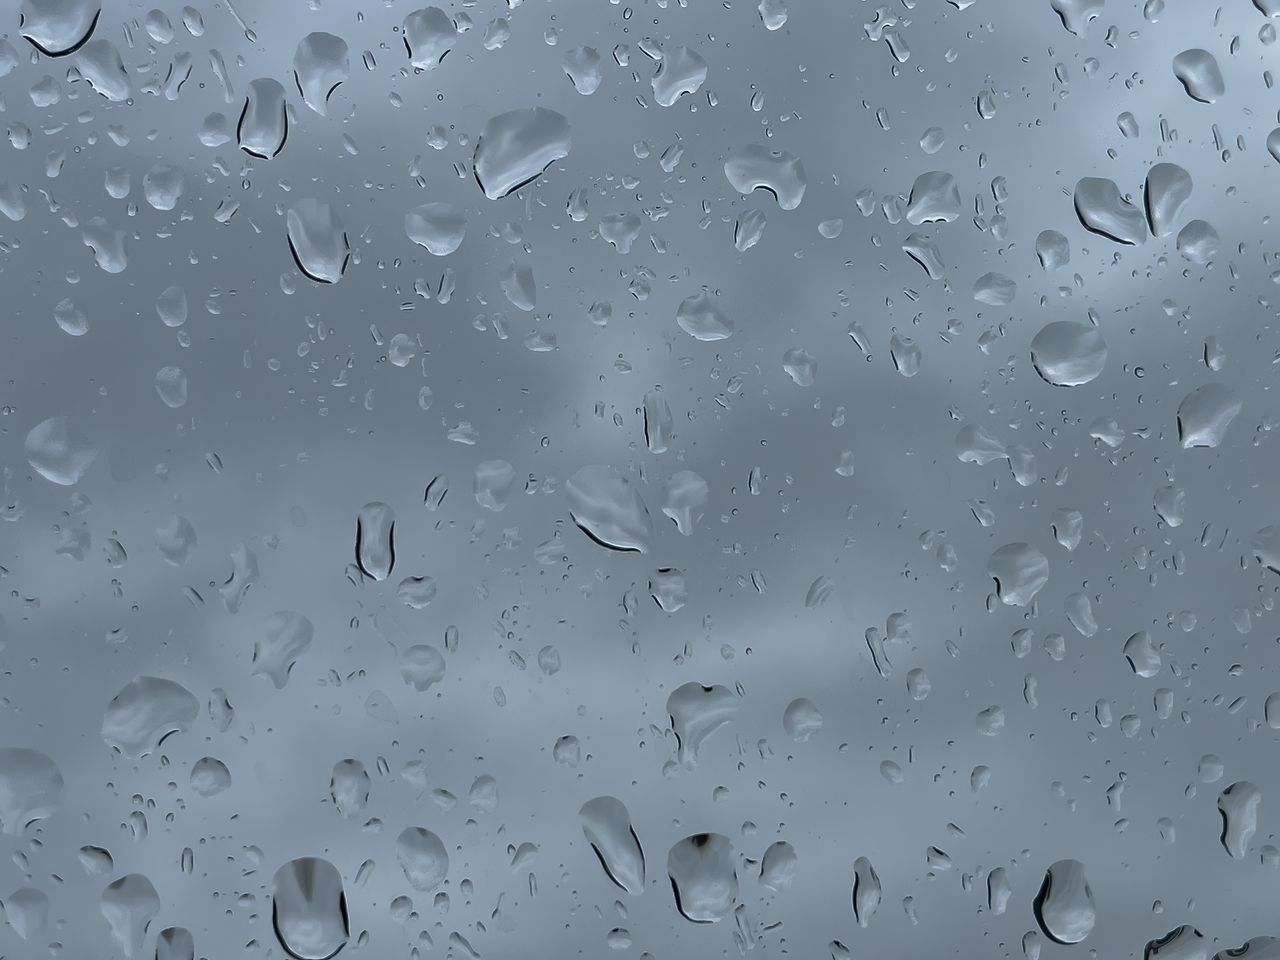 drop, wet, water, rain, black and white, window, glass, full frame, backgrounds, no people, close-up, transparent, monochrome, indoors, nature, drizzle, raindrop, freezing, rainy season, pattern, monochrome photography, sky